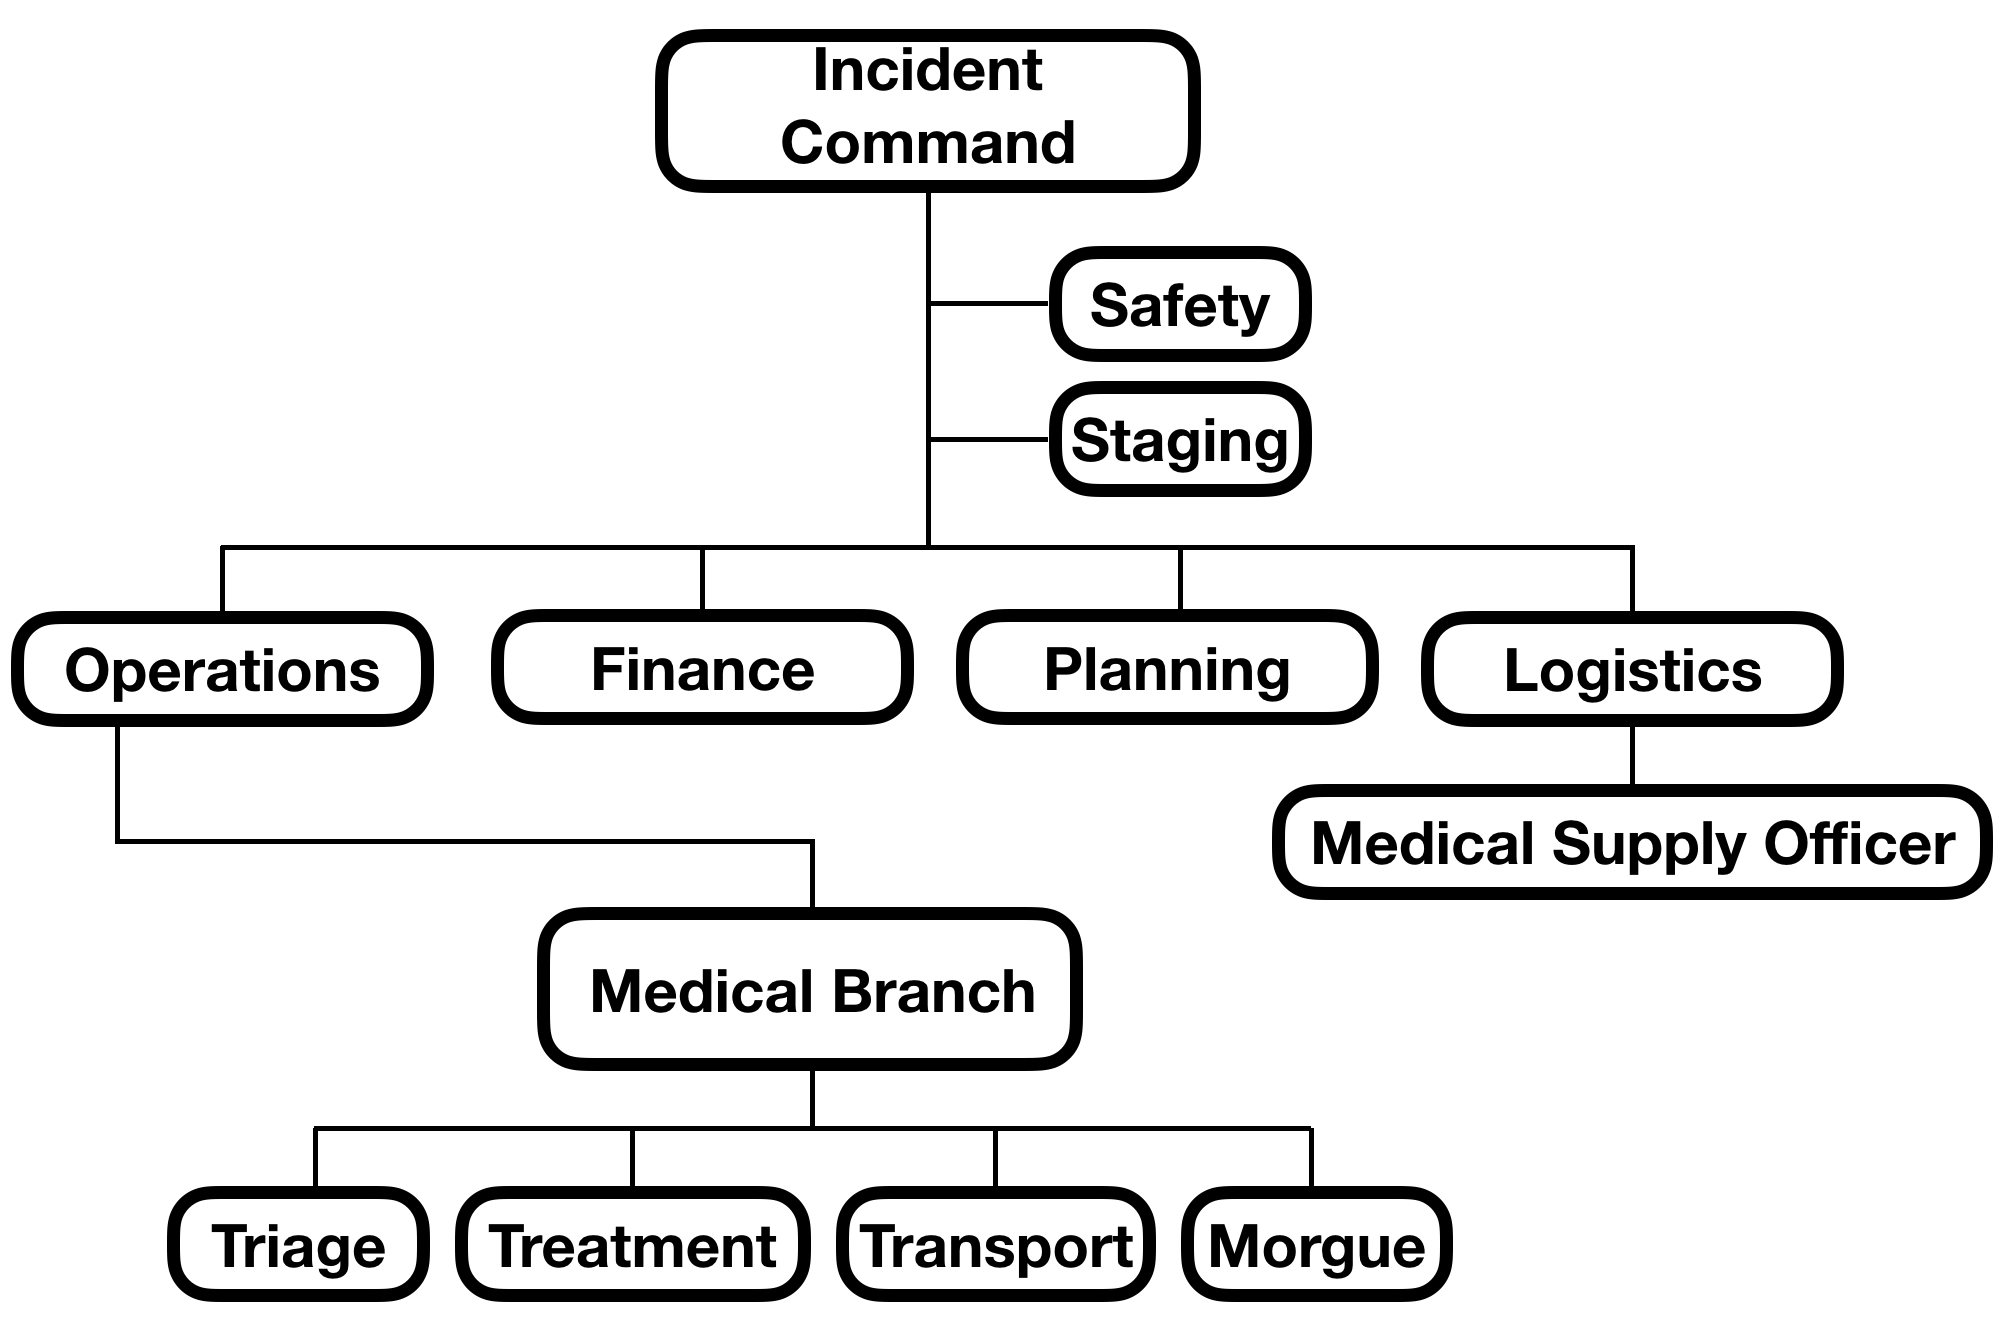 Organizational Chart for Incident Command System; Medical Branch Depicted